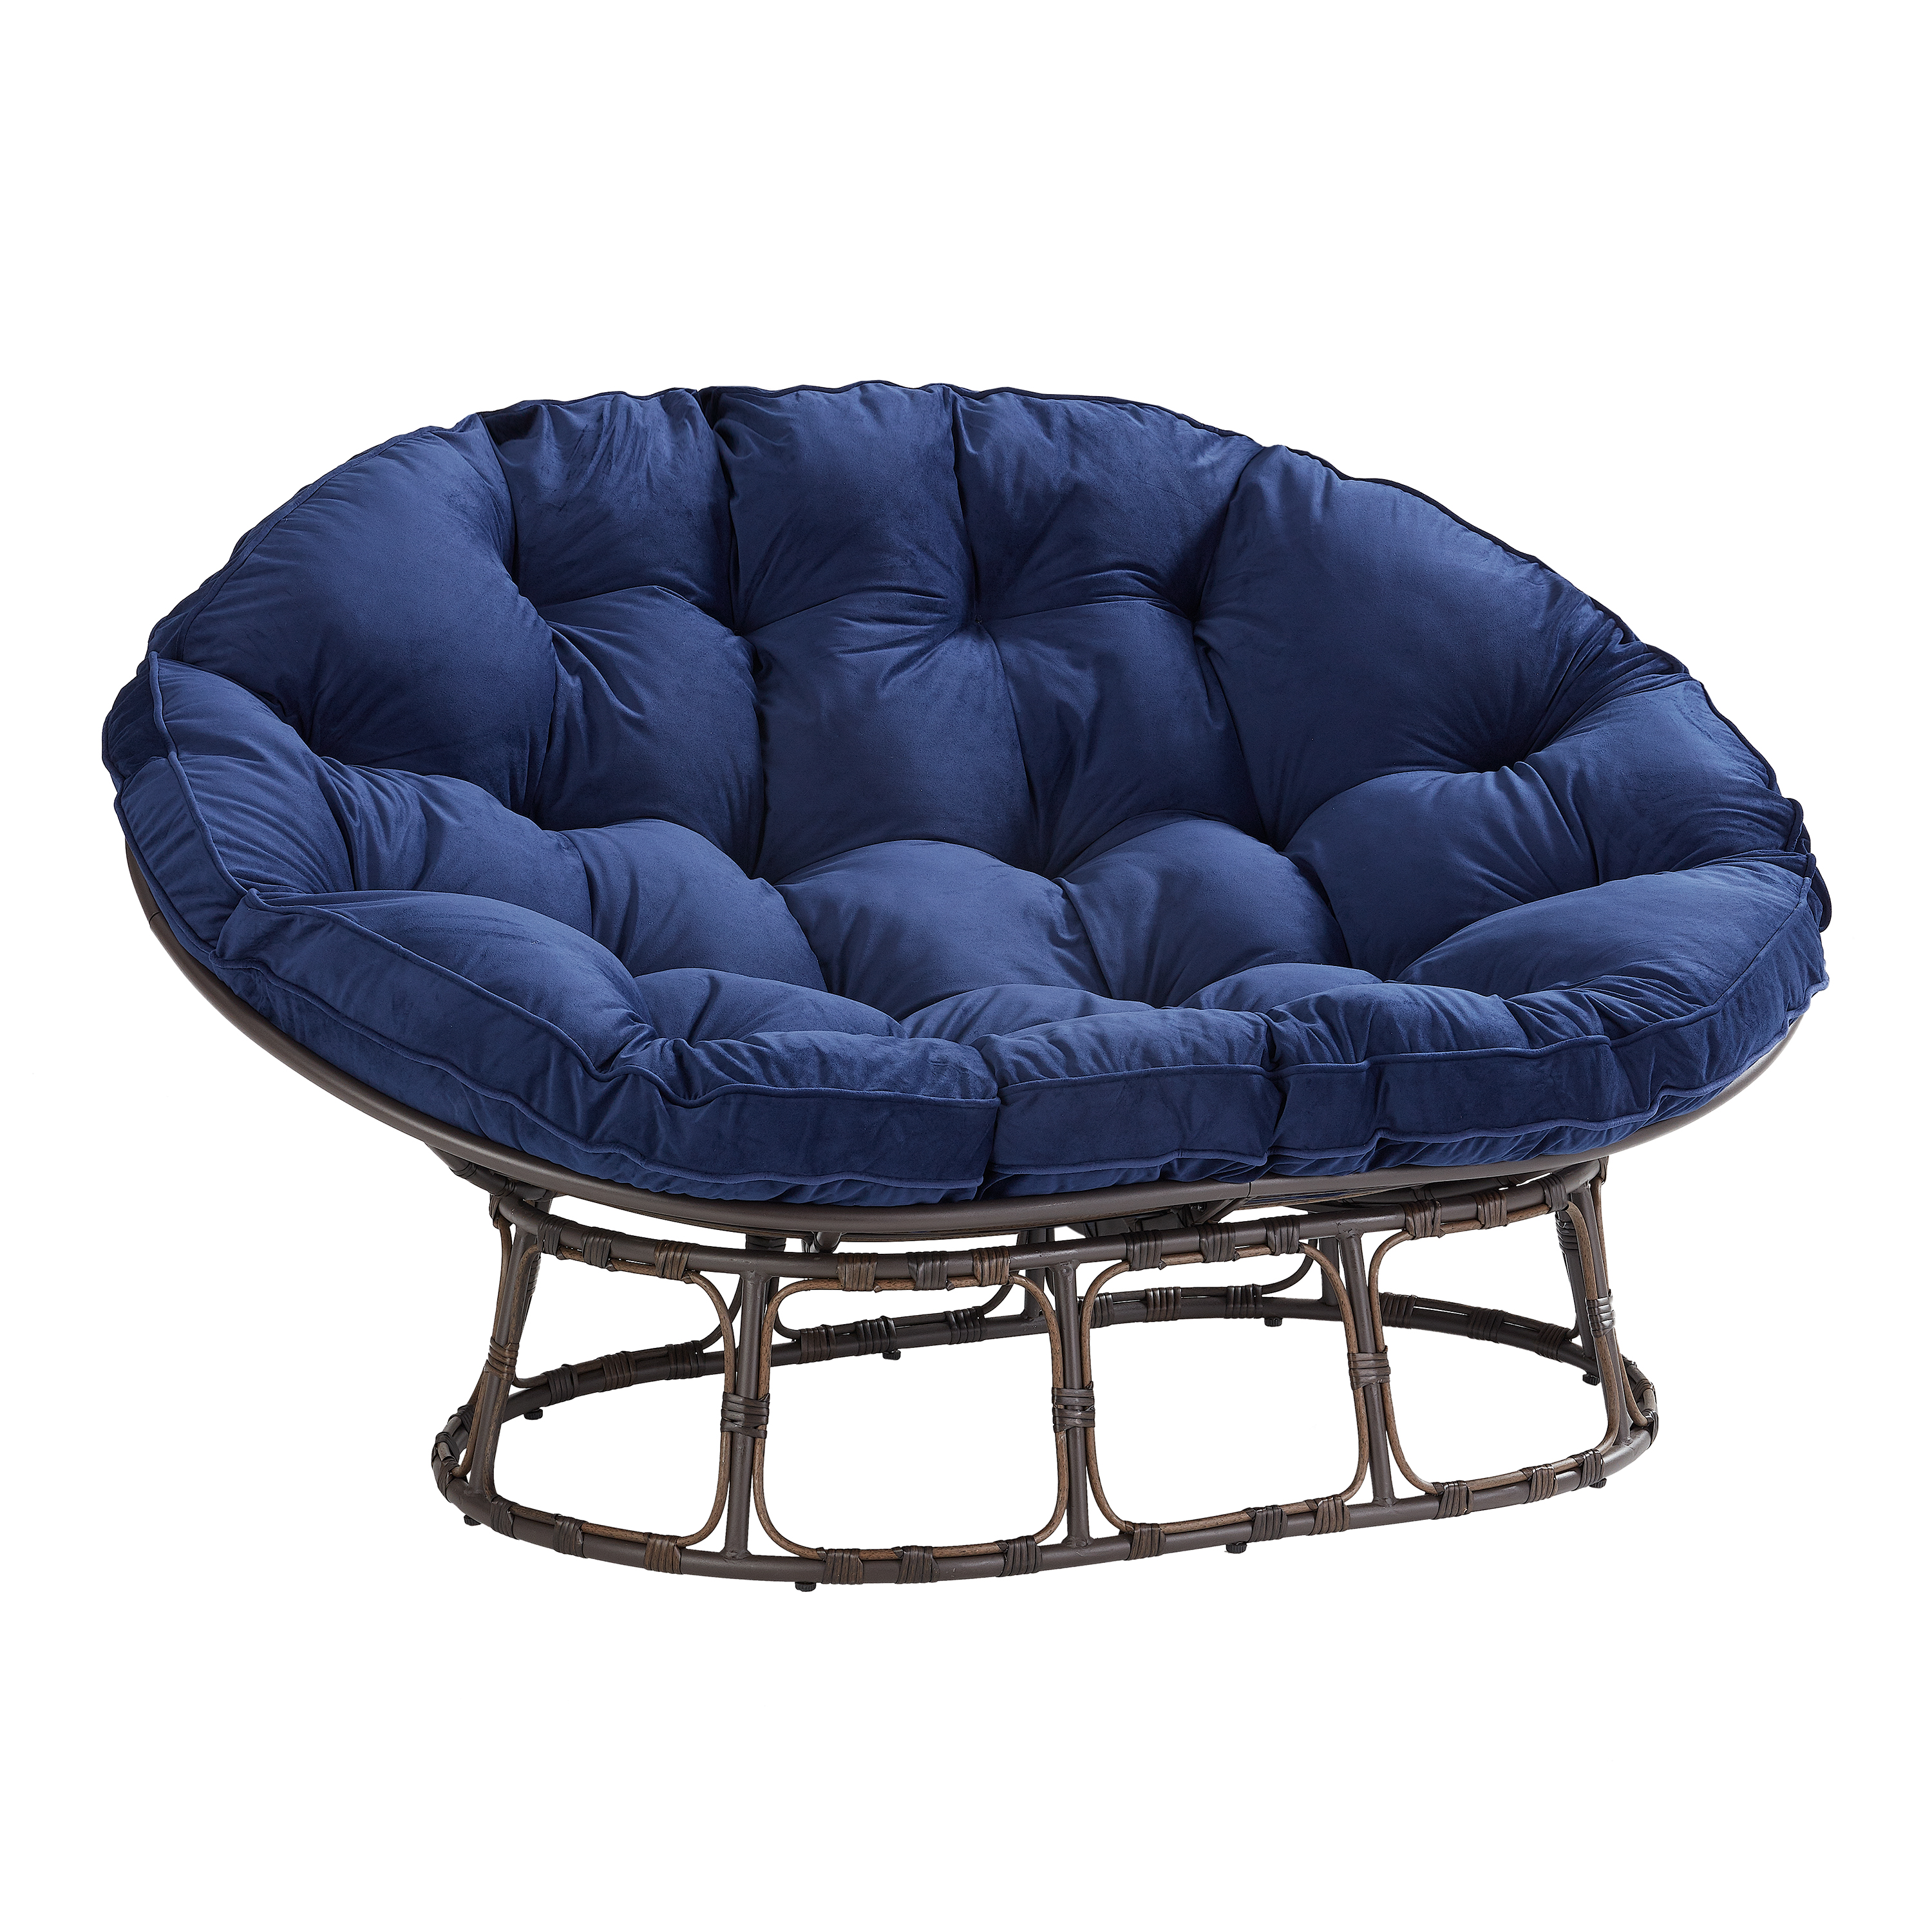 Better Homes & Gardens Double Papasan Chair, Navy Blue - image 4 of 5